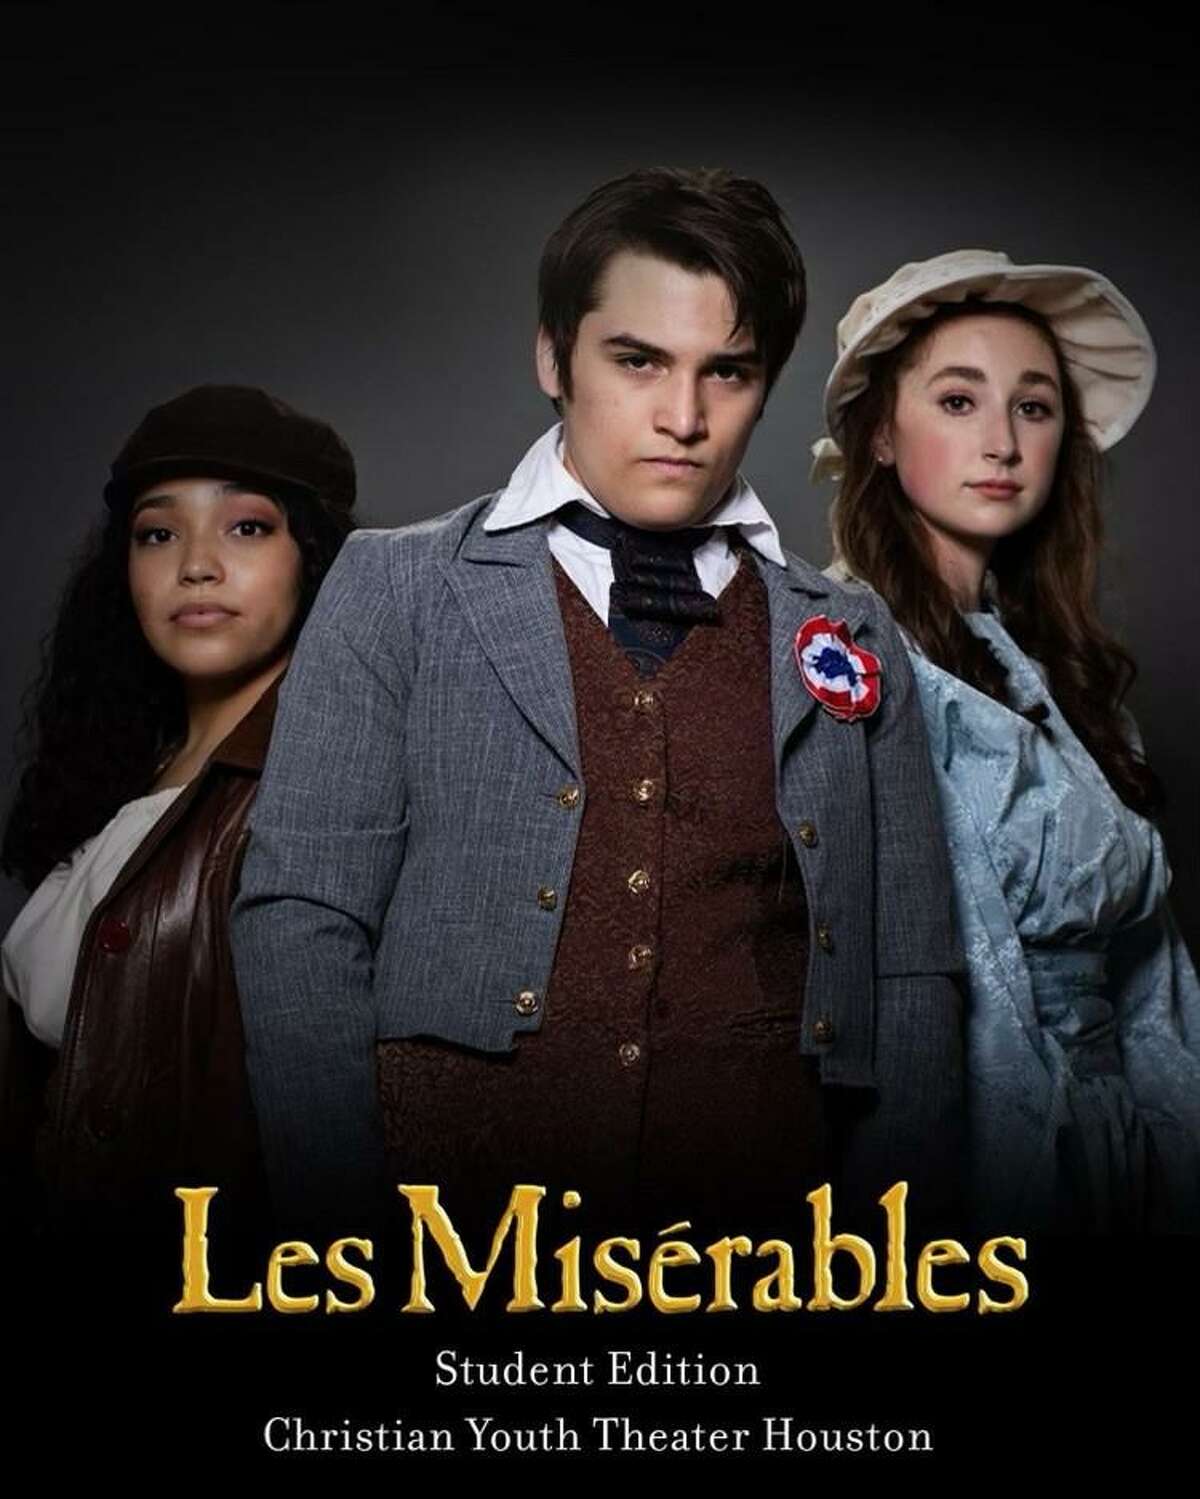 Christian Youth Theater opens "Les Miserables School Edition" May 14 at the Crighton Theatre. More tickets have been opened for this show. Visit cythouston.org for tickets.